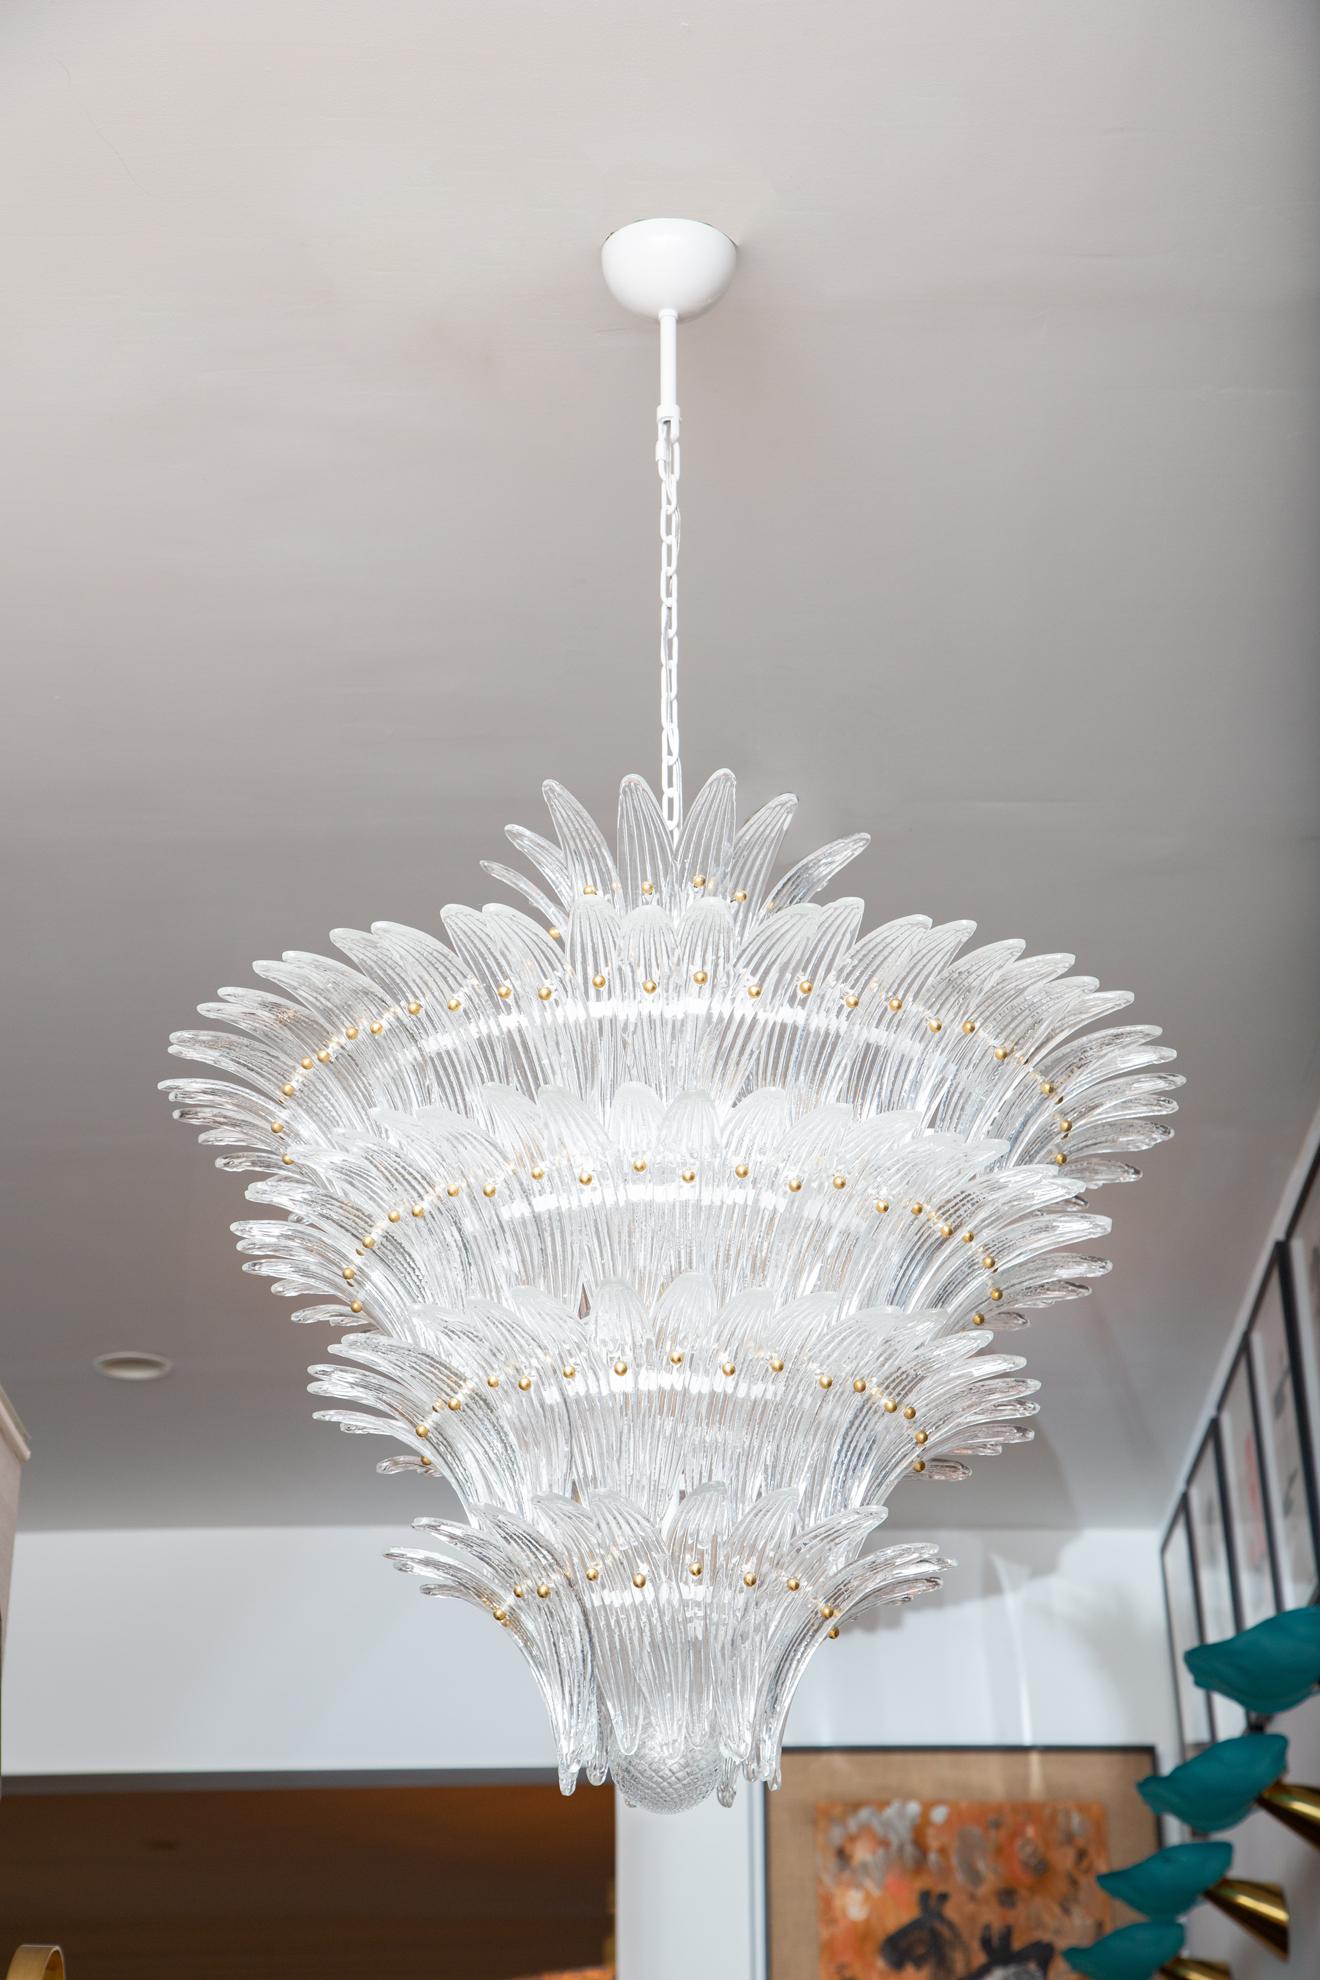 Pair of Italian palmette chandelier Murano glass leaves, in stock
Gracious Murano clear textured glass chandelier.
Five tiers 